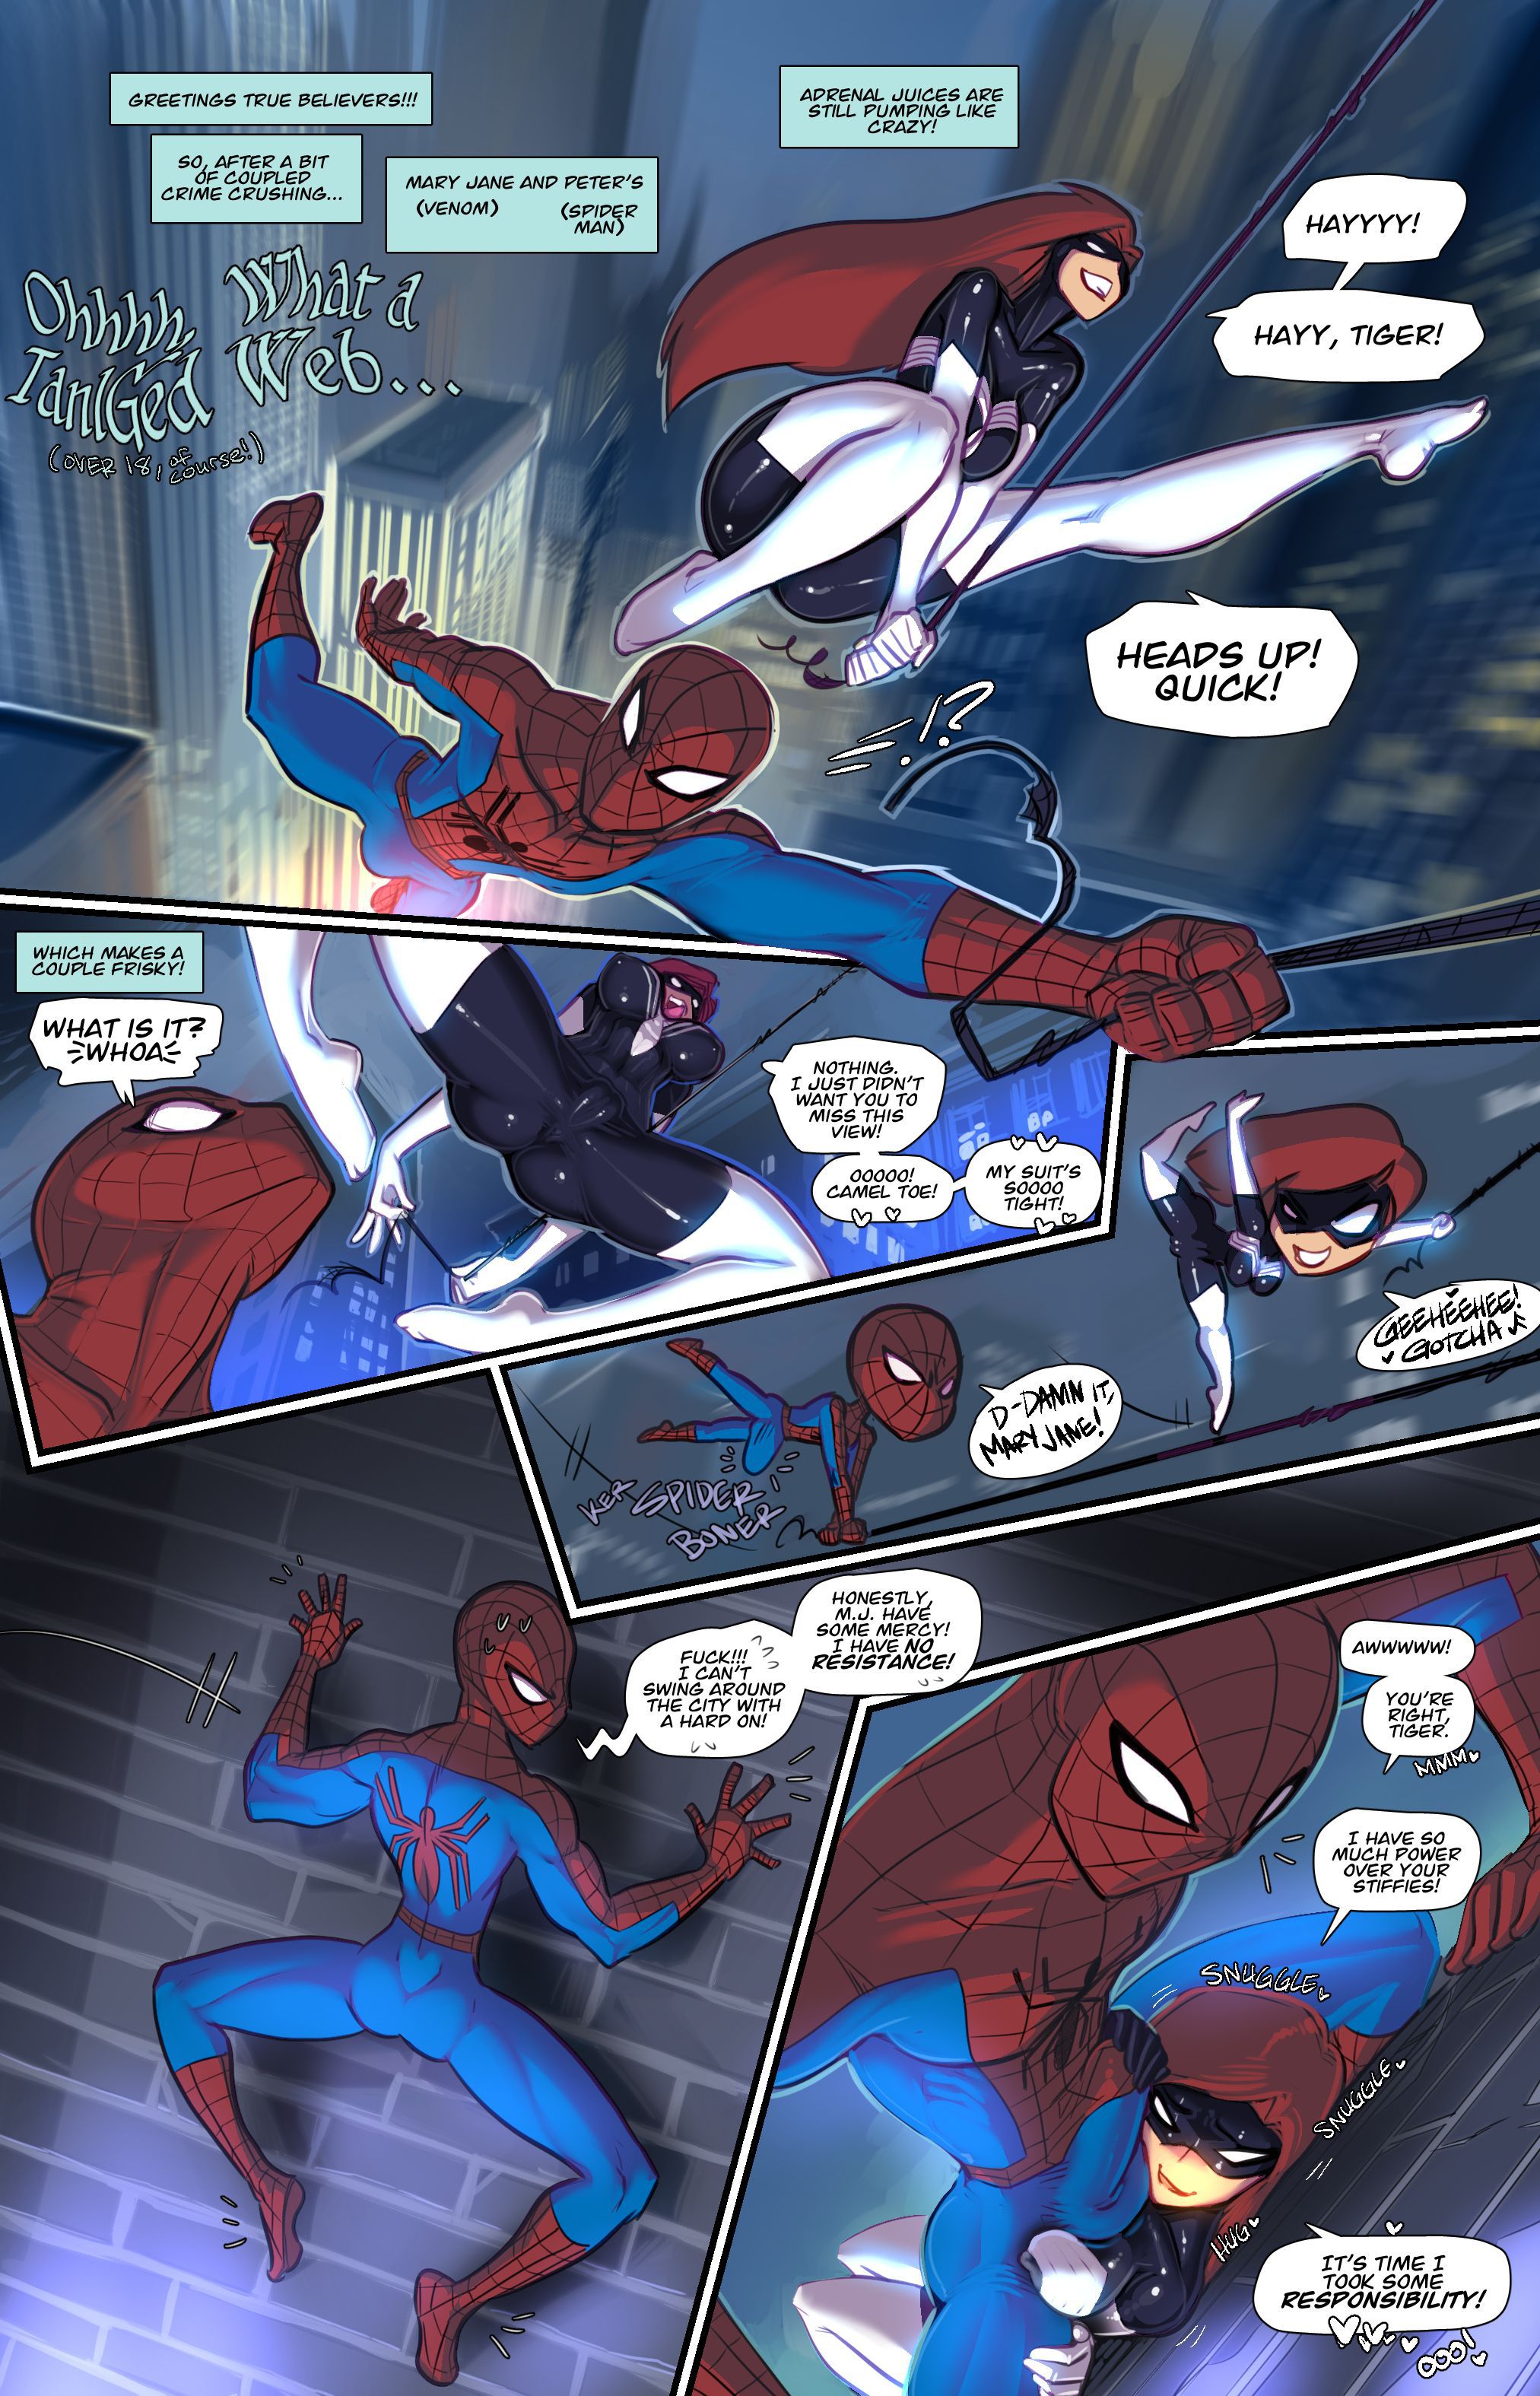 Queen Tangled Porn Comics - Ohhh, What A Tangled Web... (Spider-Man) [Fred Perry] Porn Comic |  AllPornComic